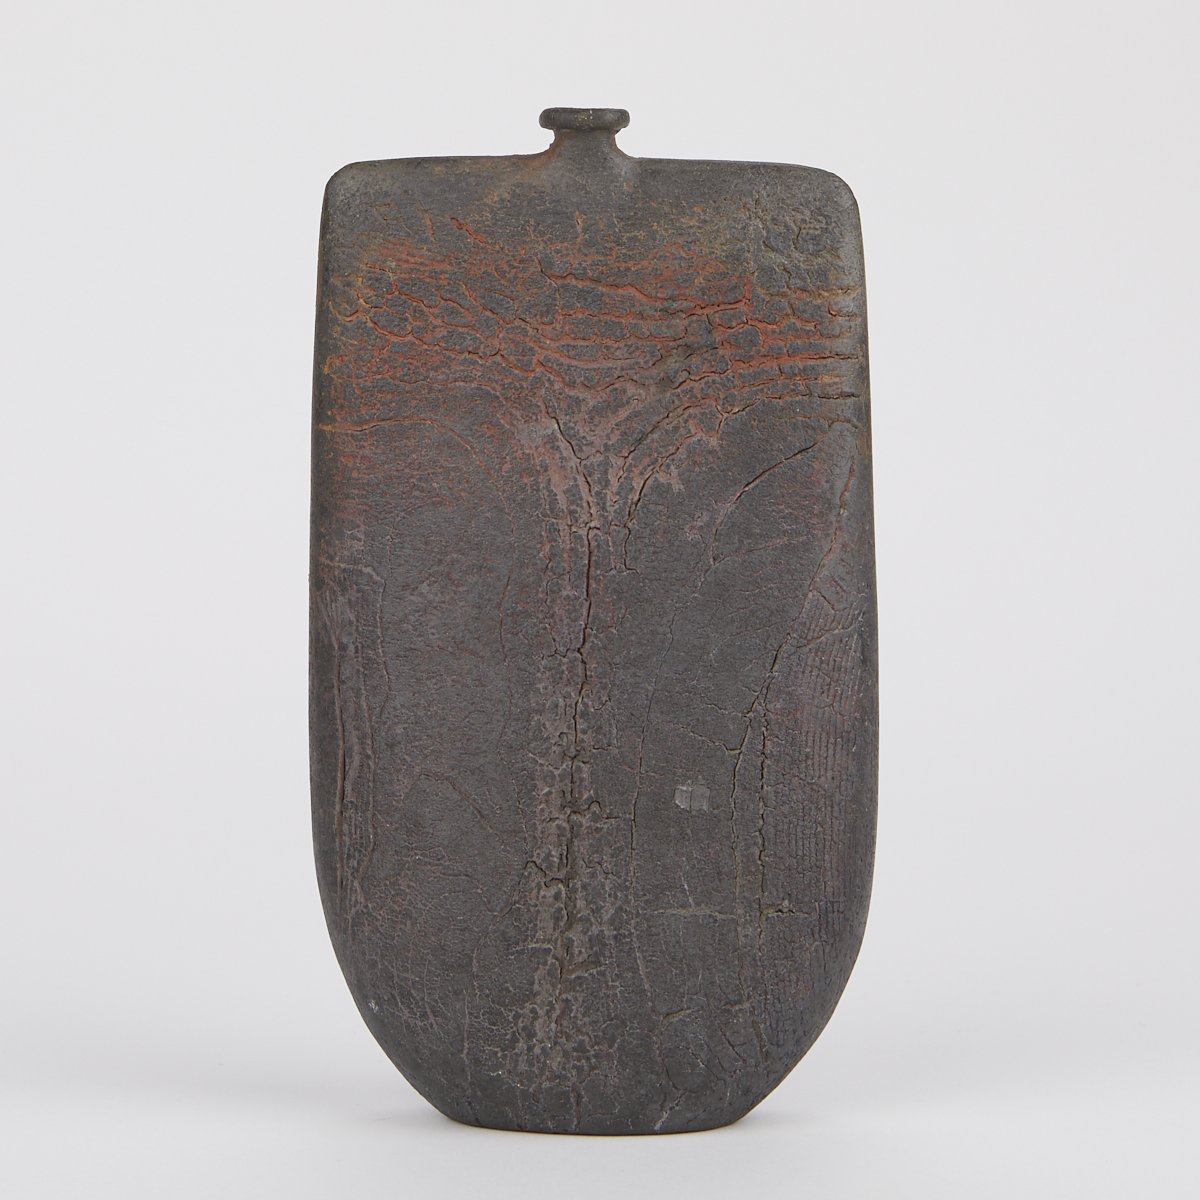 Peter Hayes Contemporary Studio Pottery Vessel - Image 3 of 8